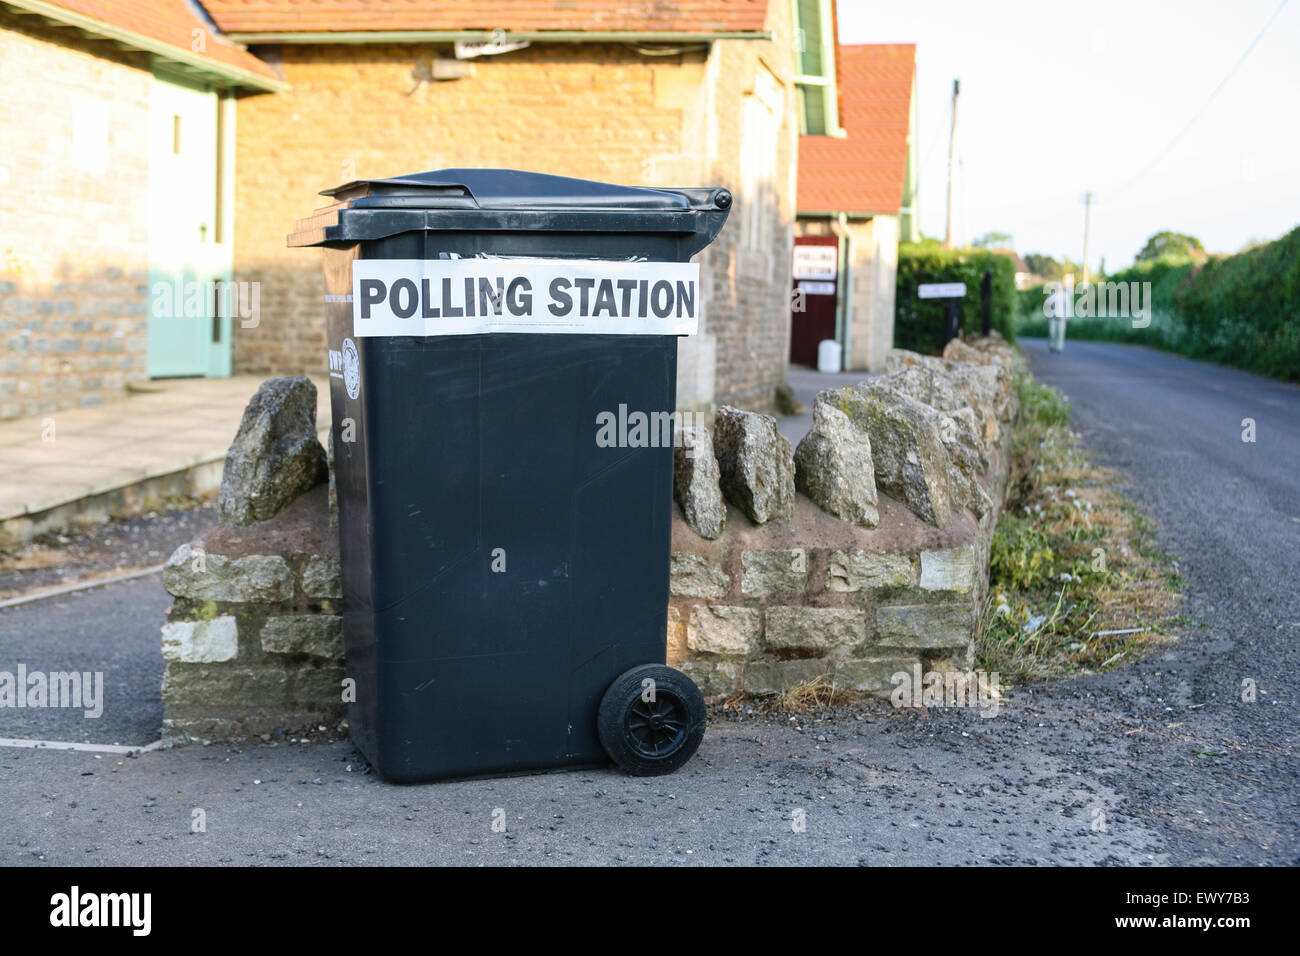 Temporary polling station for South Somerset District Council Parish elections on May 3rd 2007,St Margaret's, Horsington Village,Somerset,England,UK Stock Photo